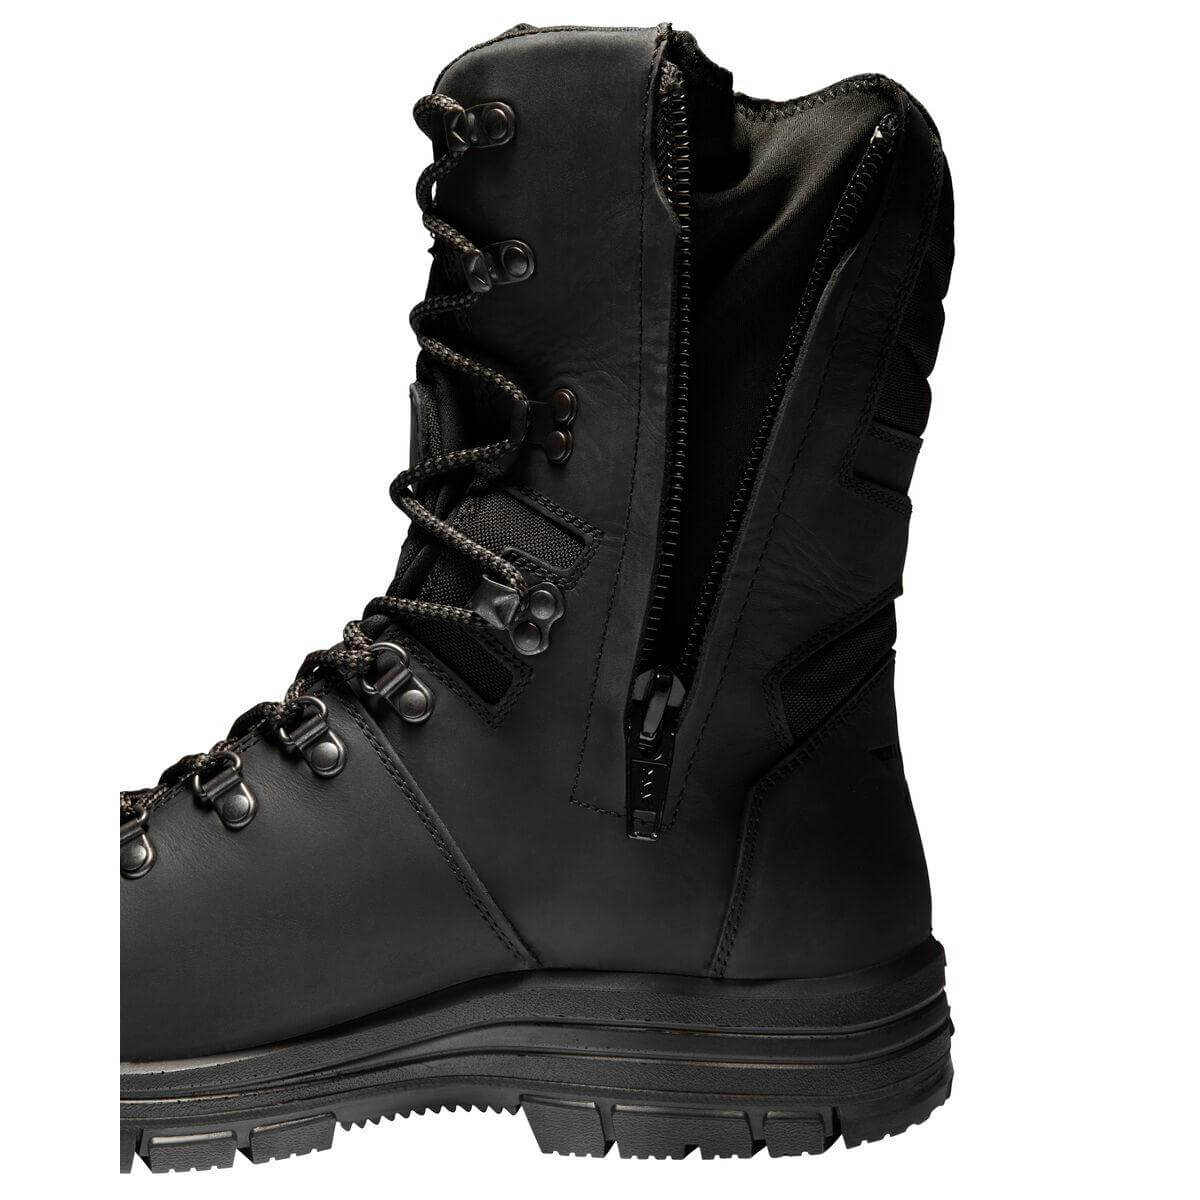 Solid Gear by Snickers 75001 Delta GTX High Leg Side Zip Premium Leather Gore Tex Waterproof Wool Lined Winter S3 Safety Boots Black 07 #colour_black